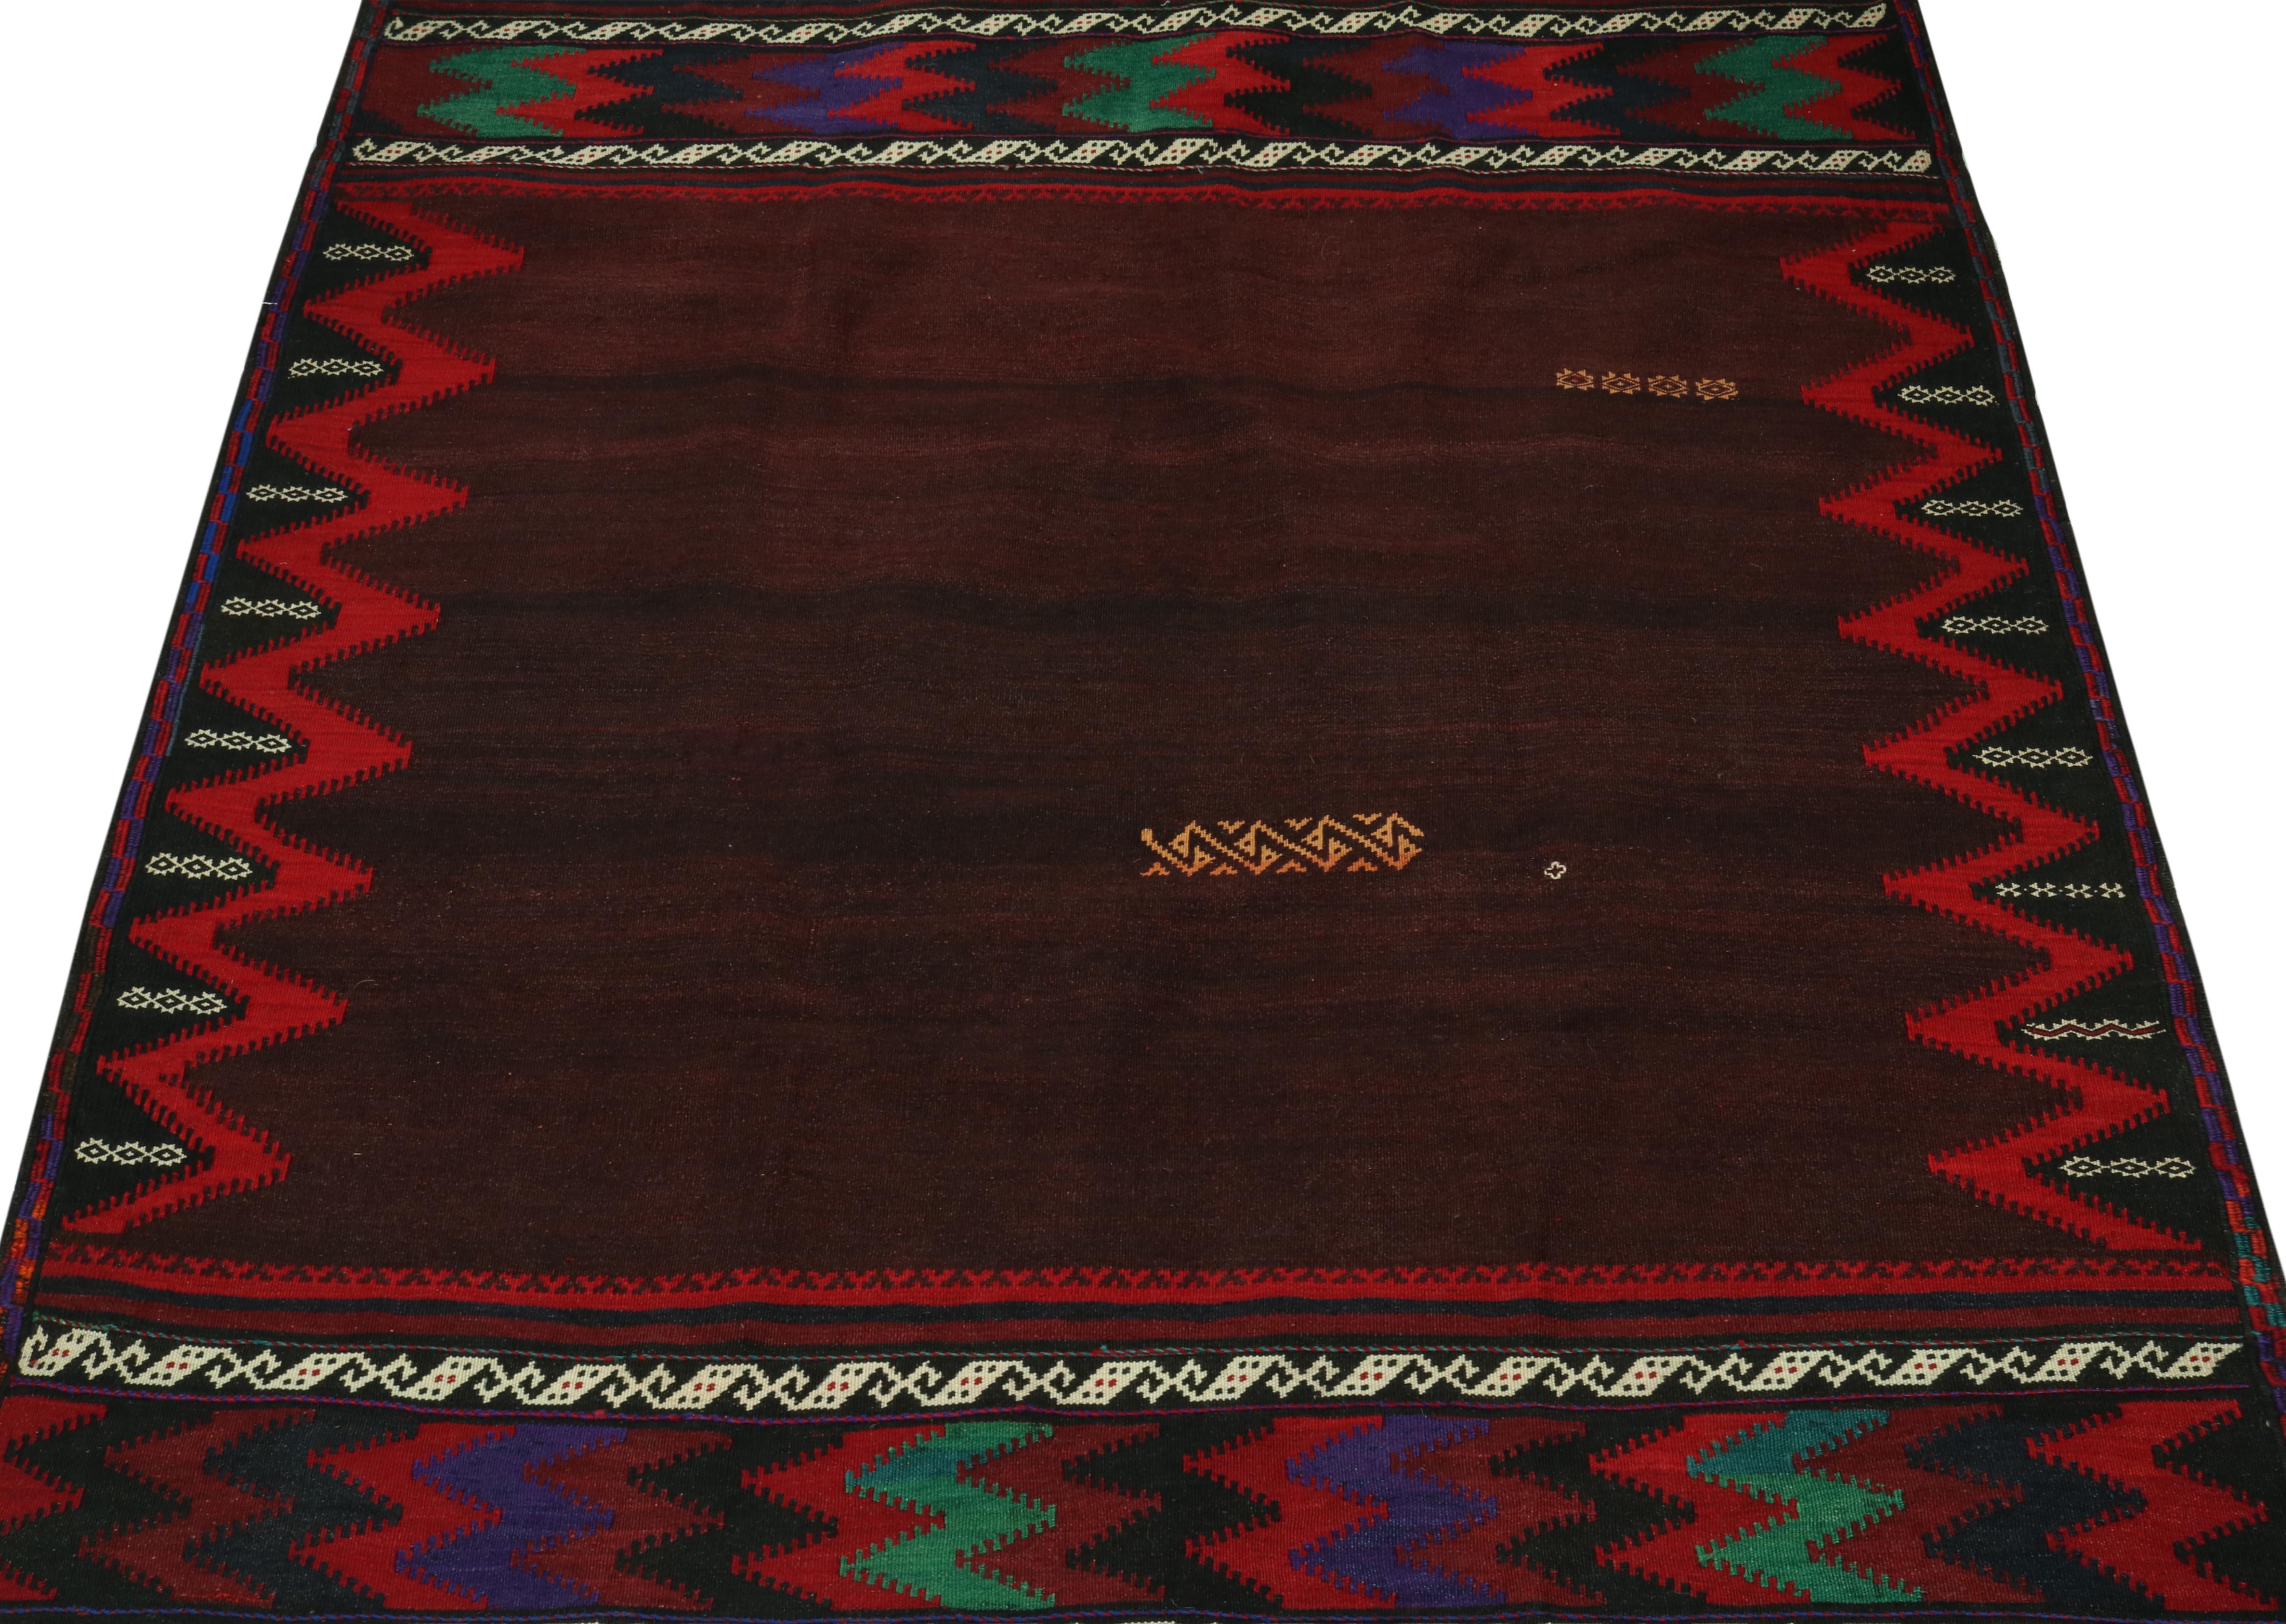 This vintage 4x4 square Persian kilim is a tribal Sofreh rug—handwoven in wool circa 1970-1980.

Further on the Design:

Sofreh Kilims like this piece are known for their minimalist patterns with vibrant colors and durable bodies. This particular